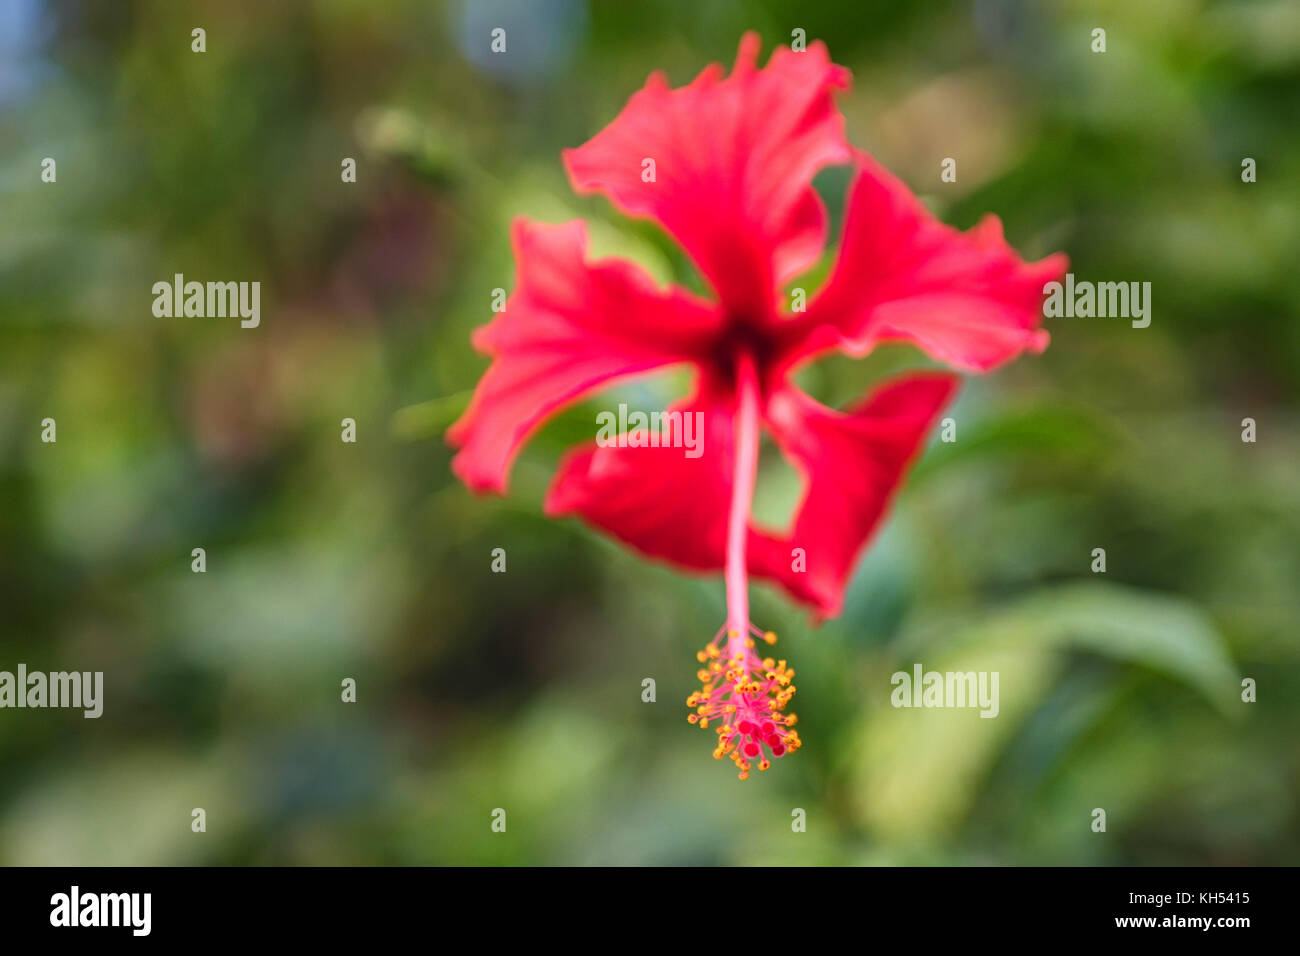 Close up bright red Hibiscus flower outdoors Stock Photo